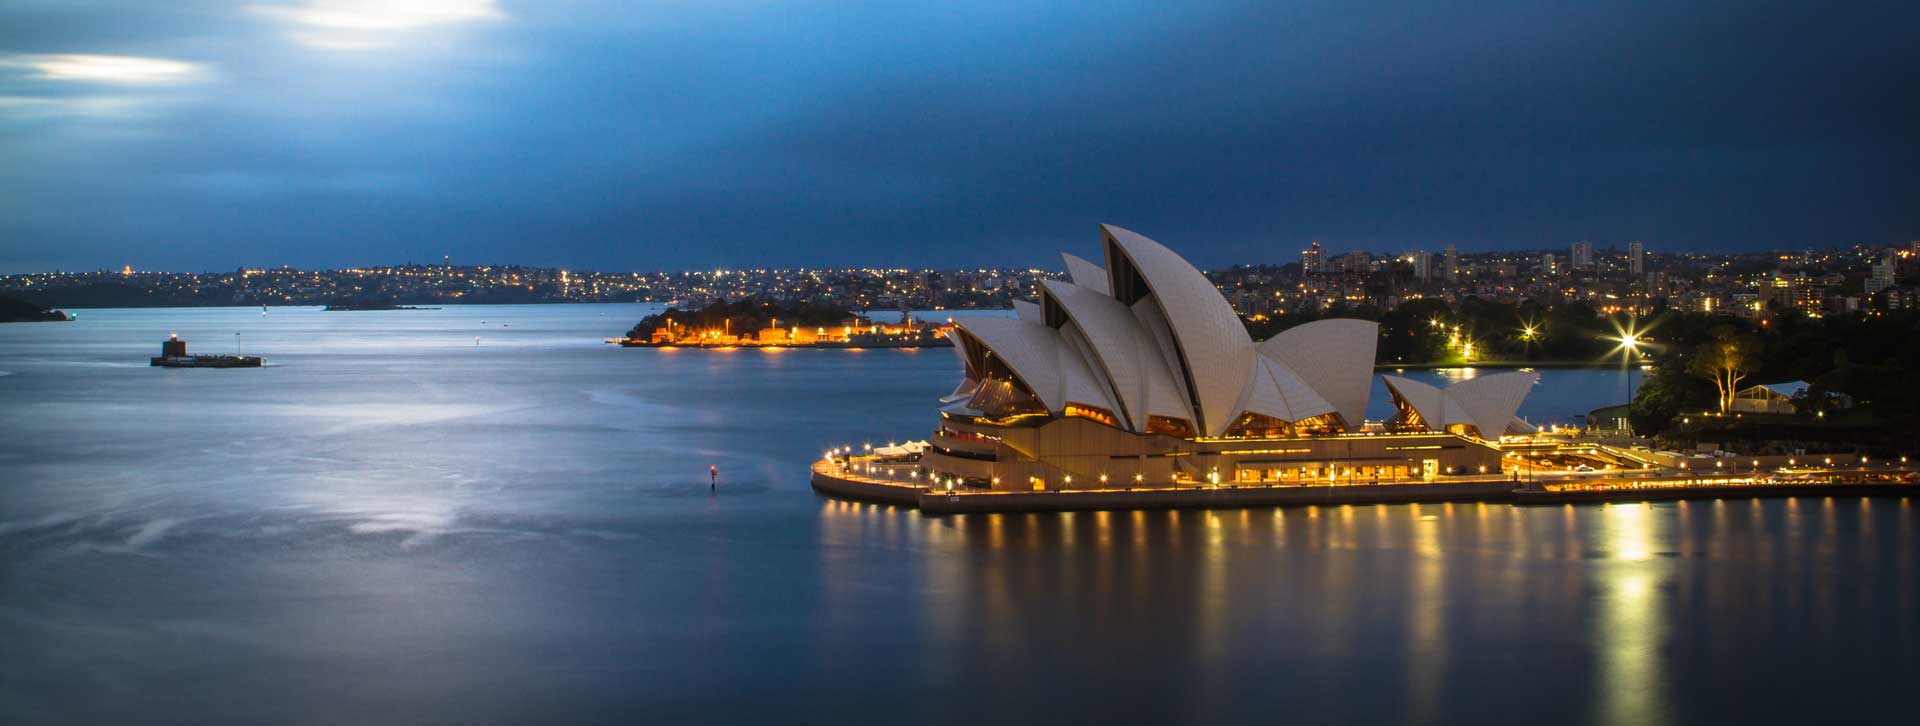 Sydney Harbour and Opera House in Australia